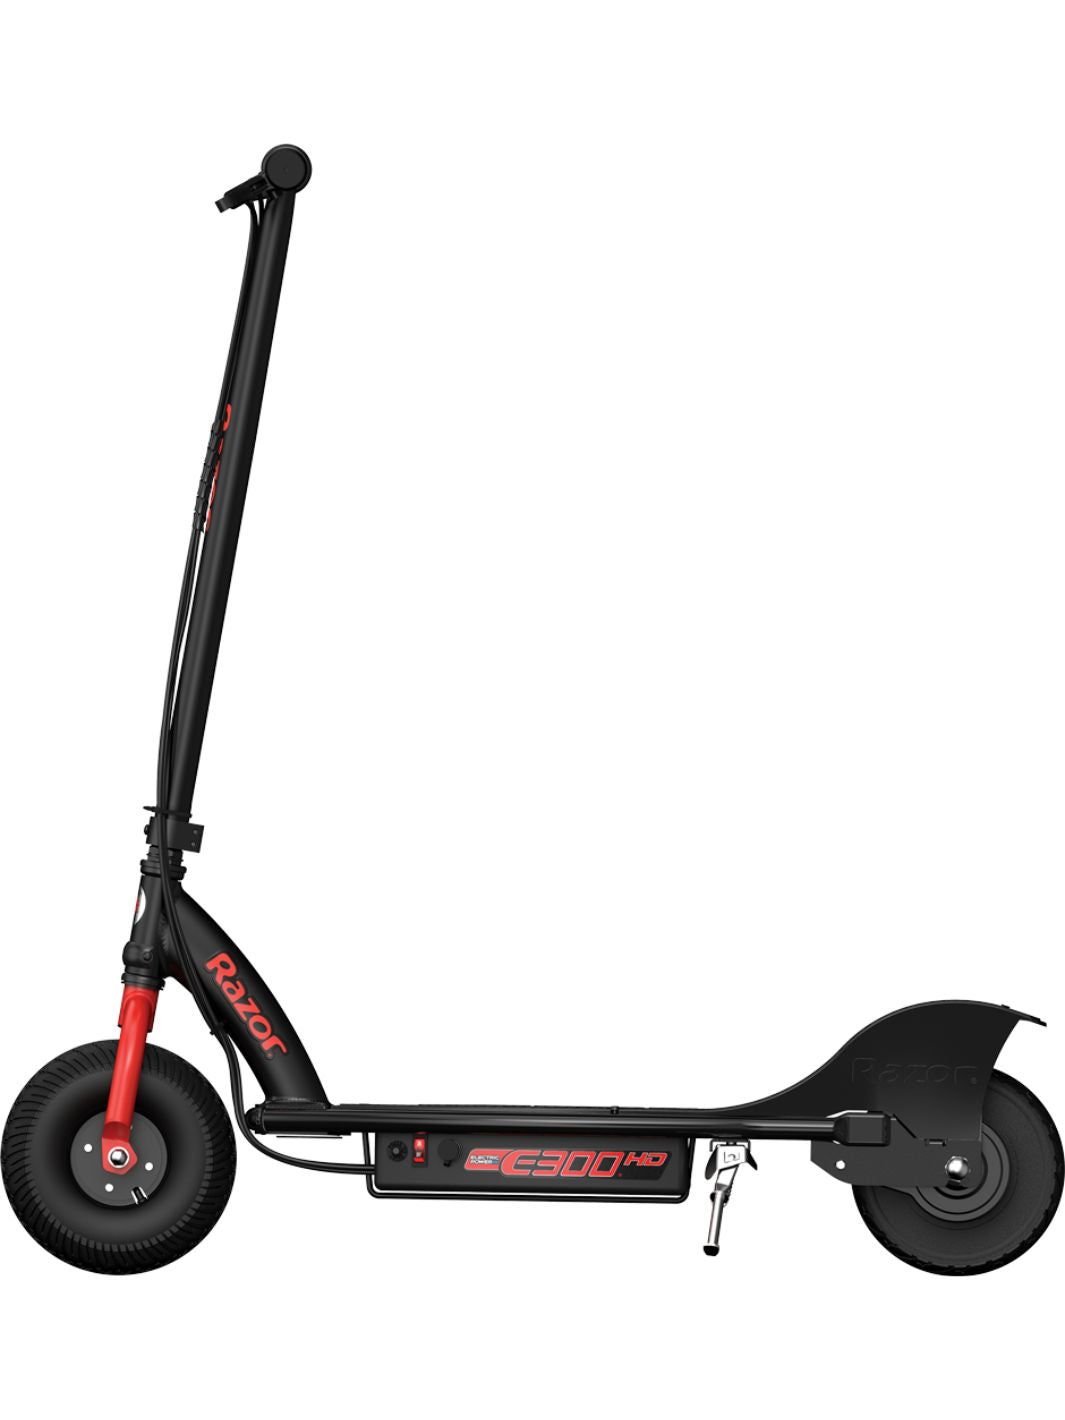 E300HD Black and Red Electric Scooter